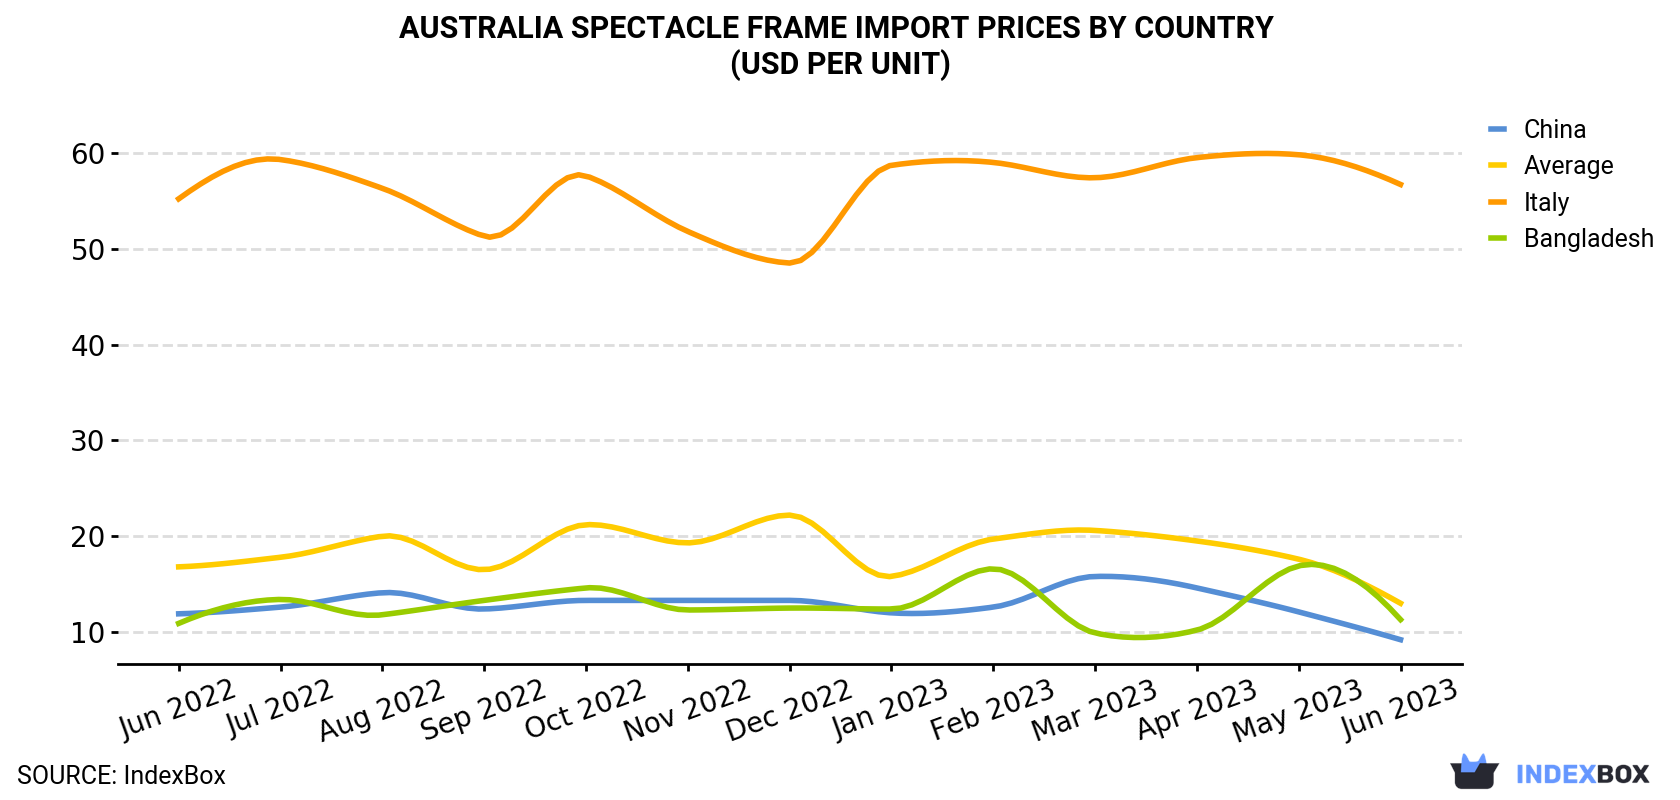 Australia Spectacle Frame Import Prices By Country (USD Per Unit)